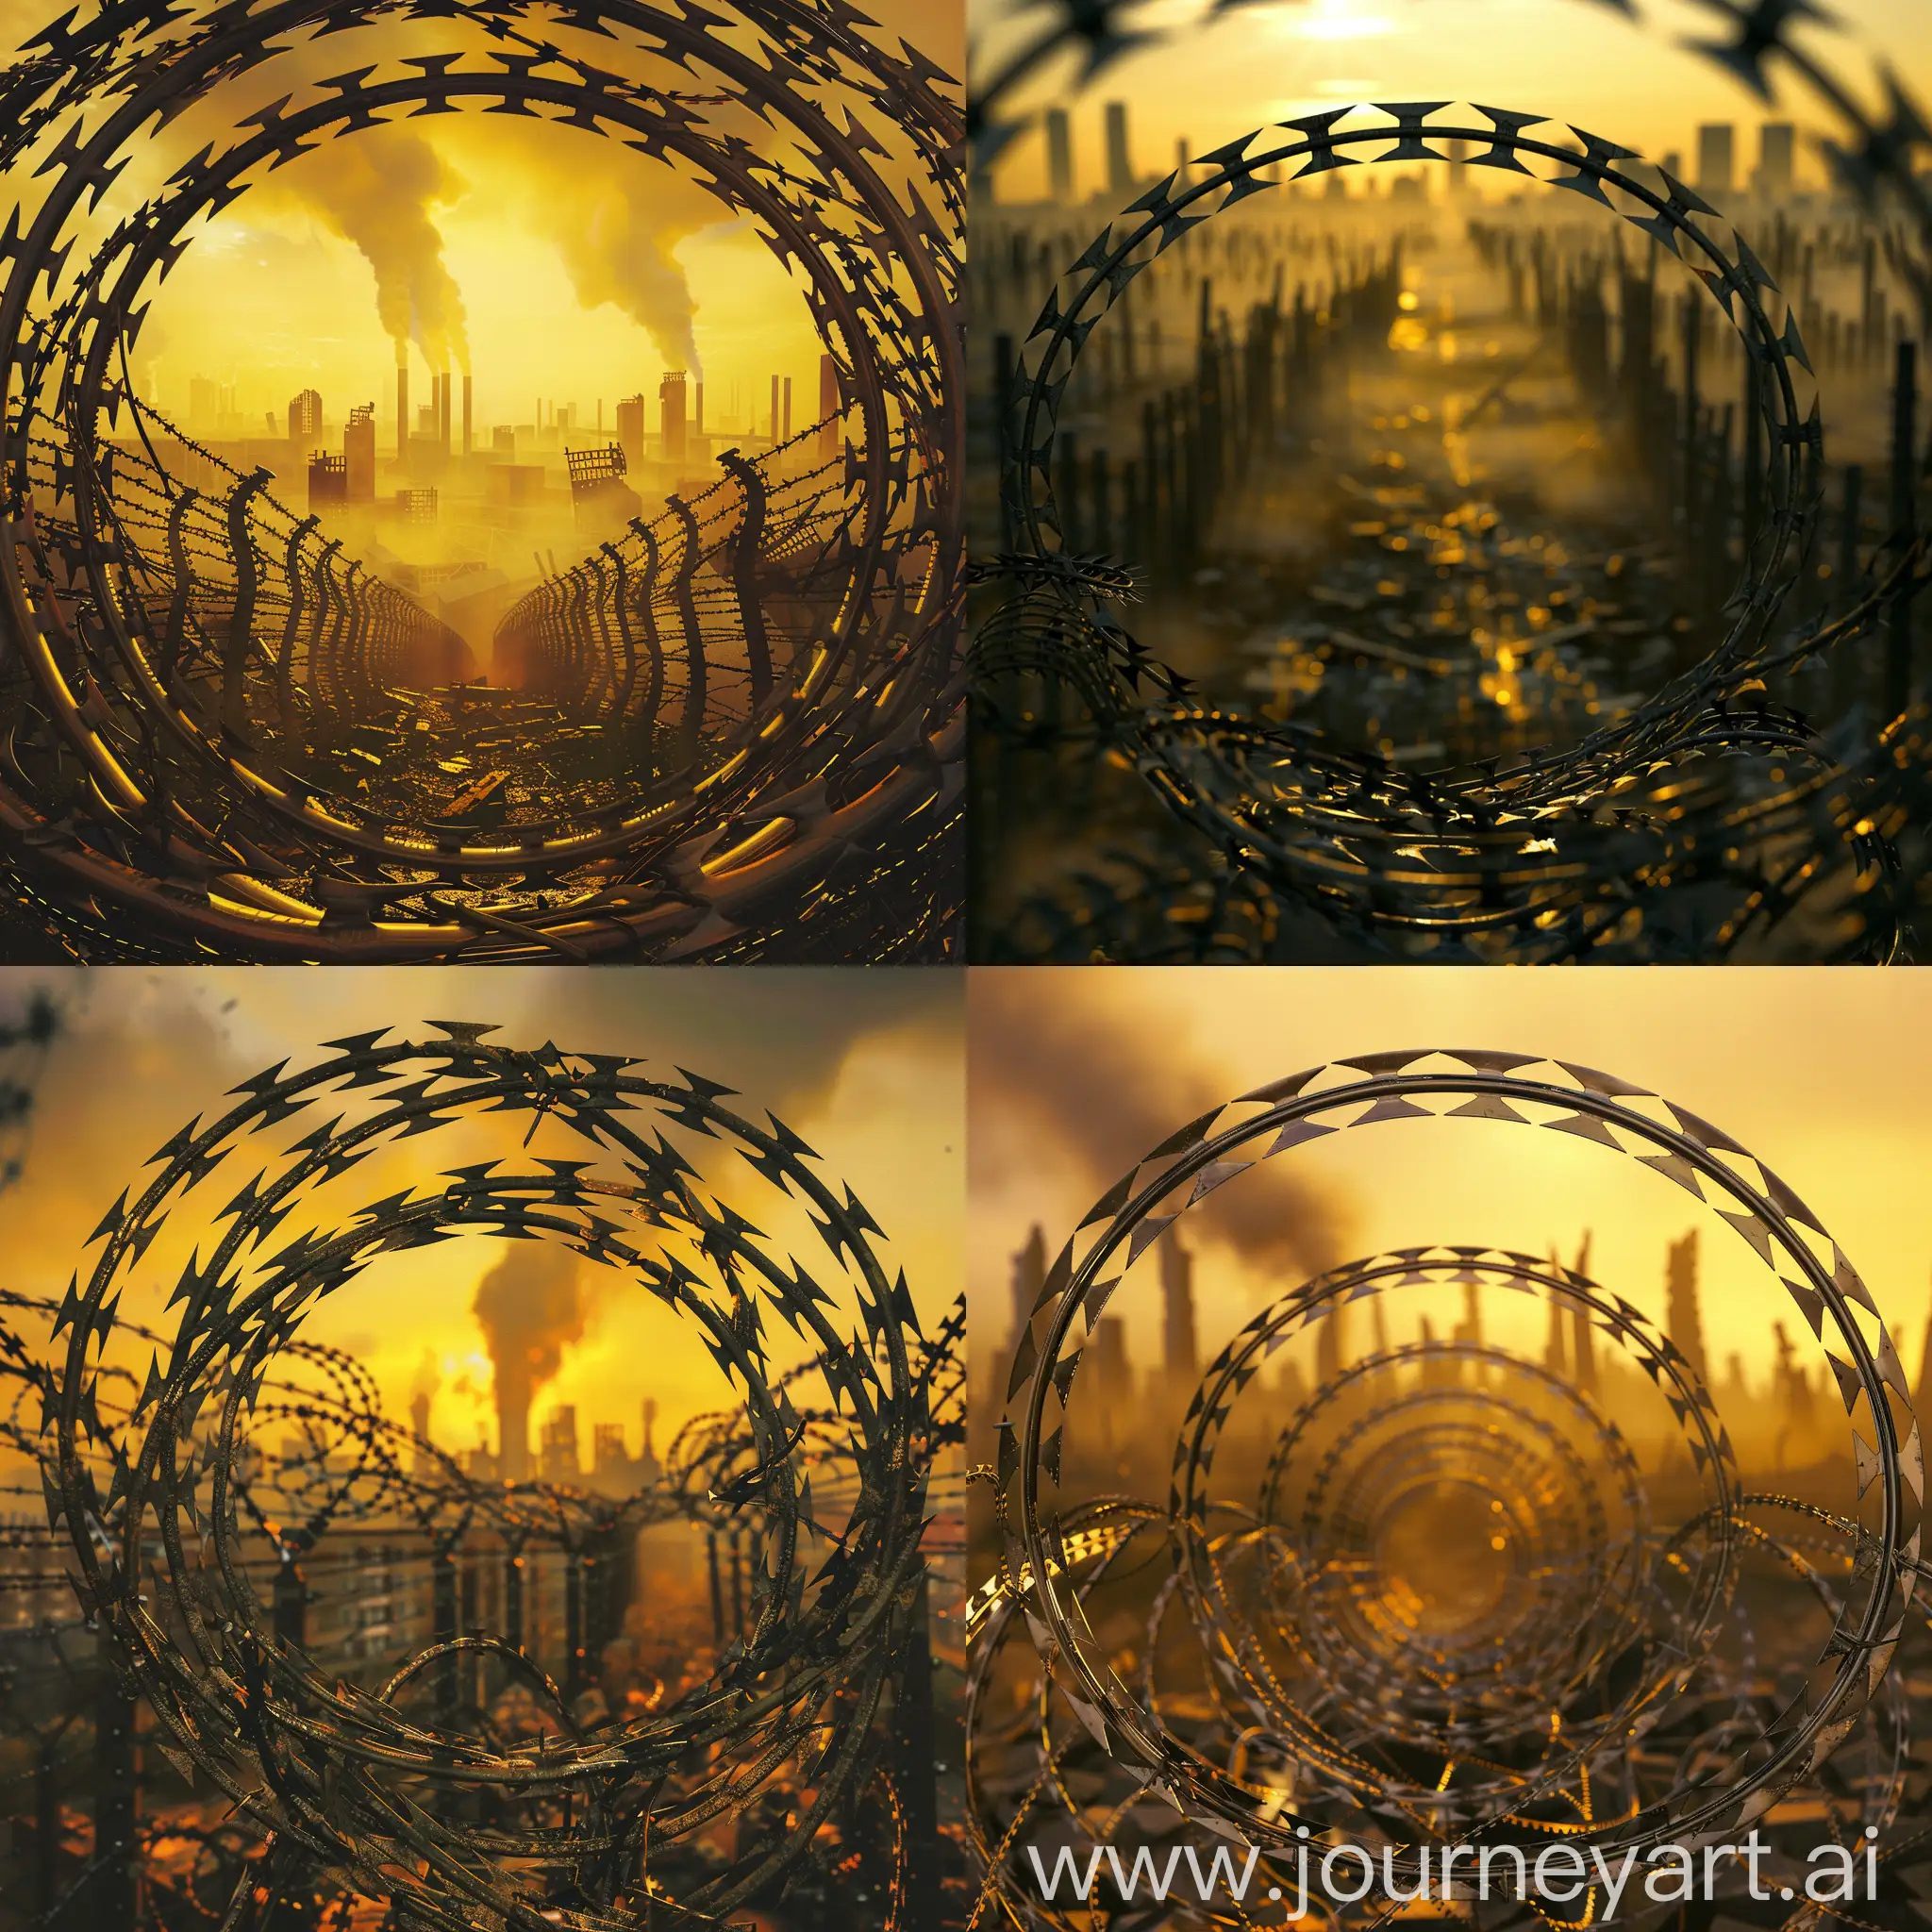 Circular-Barbed-Wire-Fence-Surrounding-Ruined-Soviet-City-at-Dawn